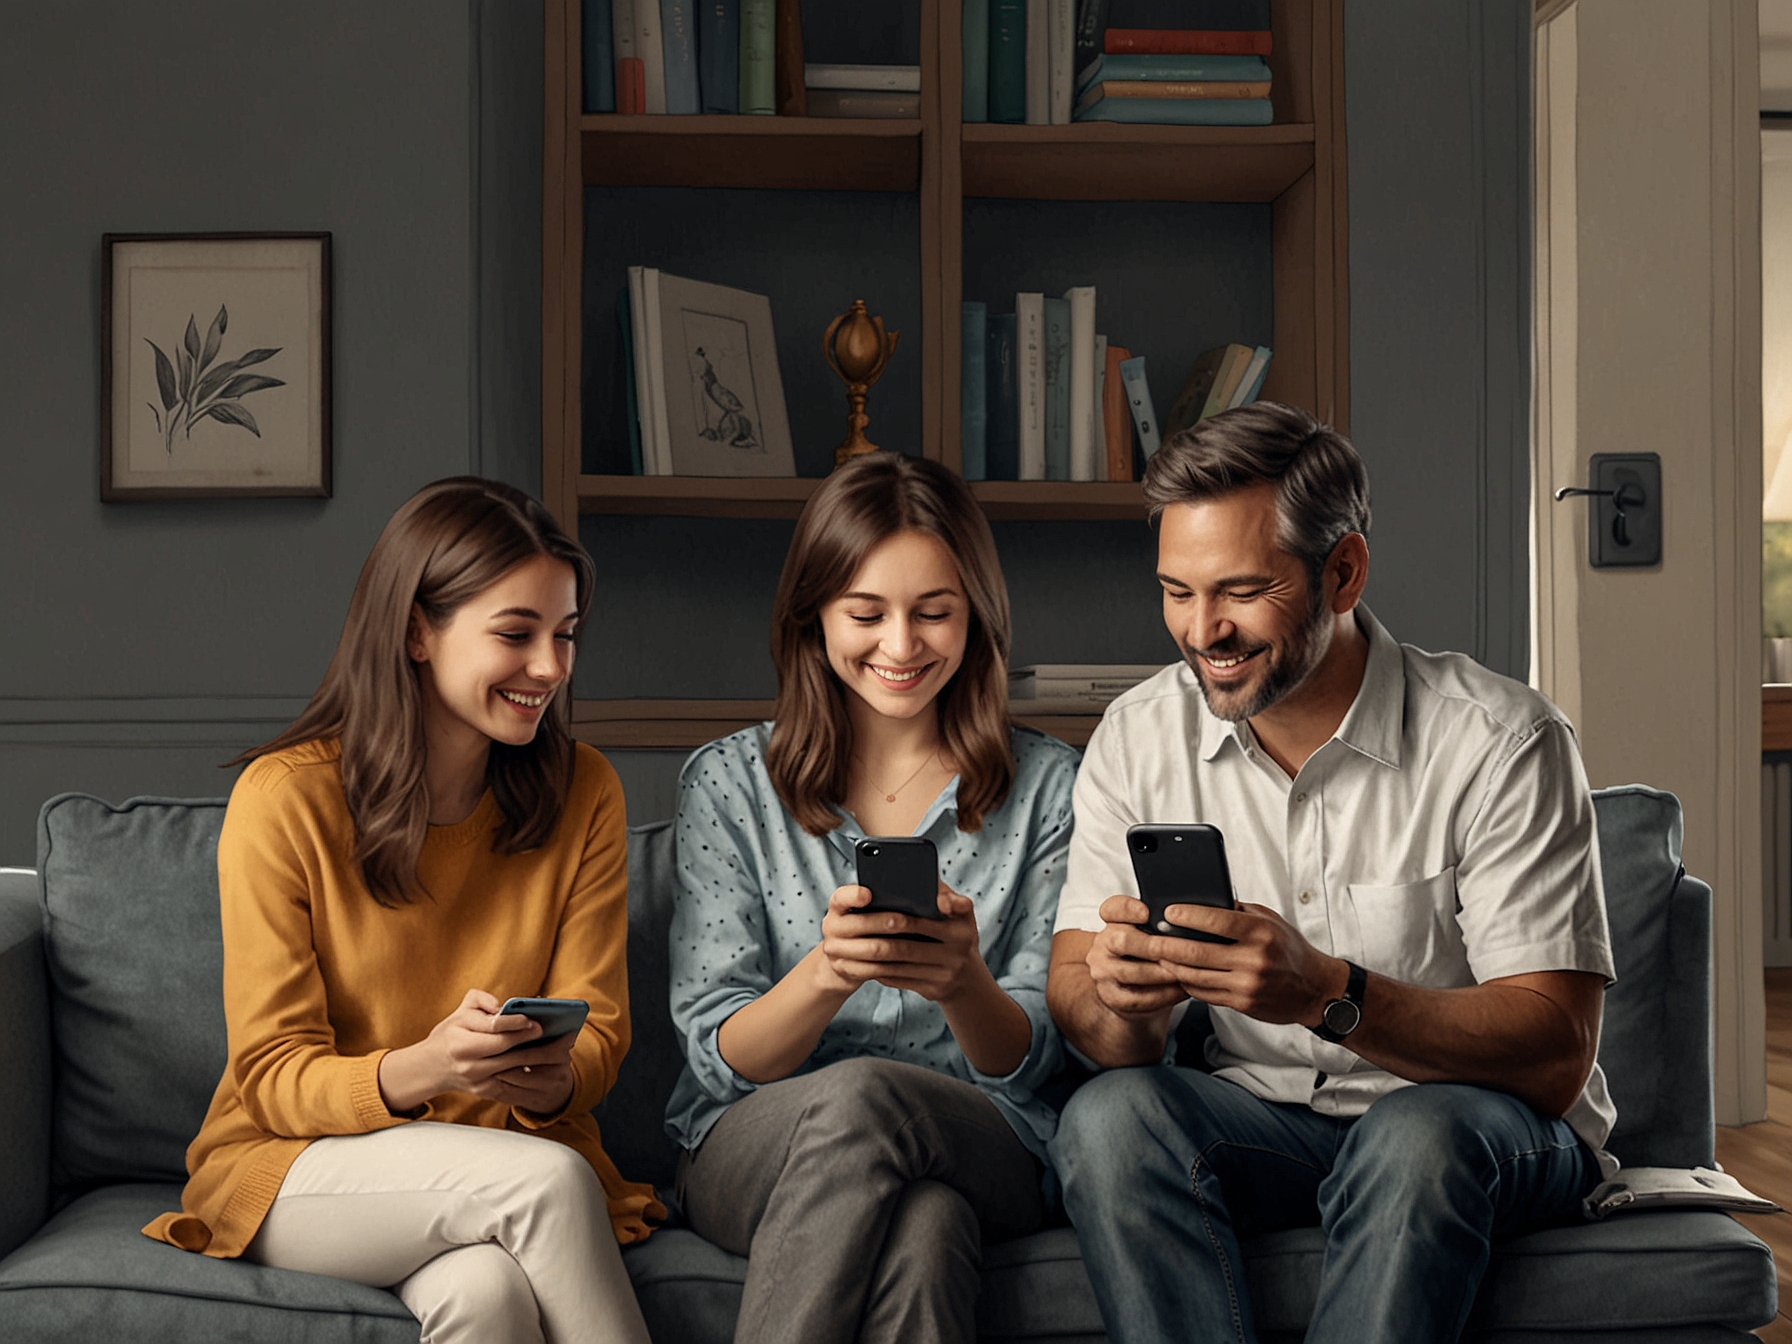 A family enjoying quality time together without the interference of smartphones, highlighting the improved real-world interactions and relationships when using a dumbphone.